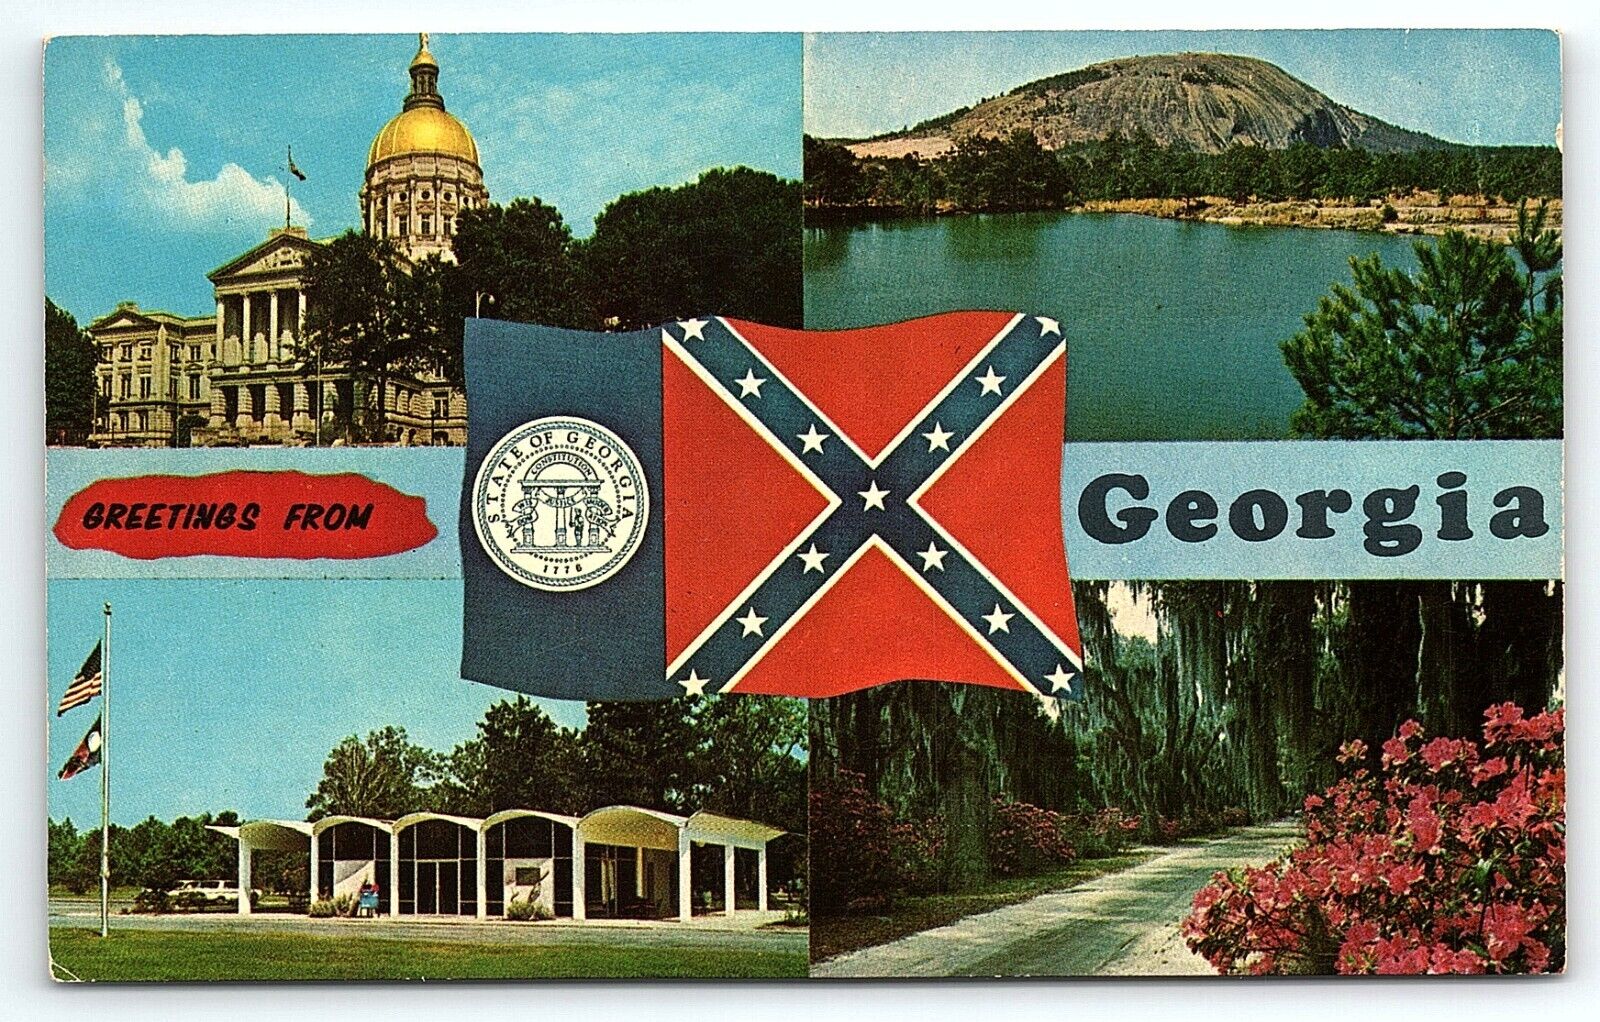 c1960 GREETINGS FROM GEORGIA STONE MOUNTAIN STATE FLAG CAPITOL POSTCARD P4373